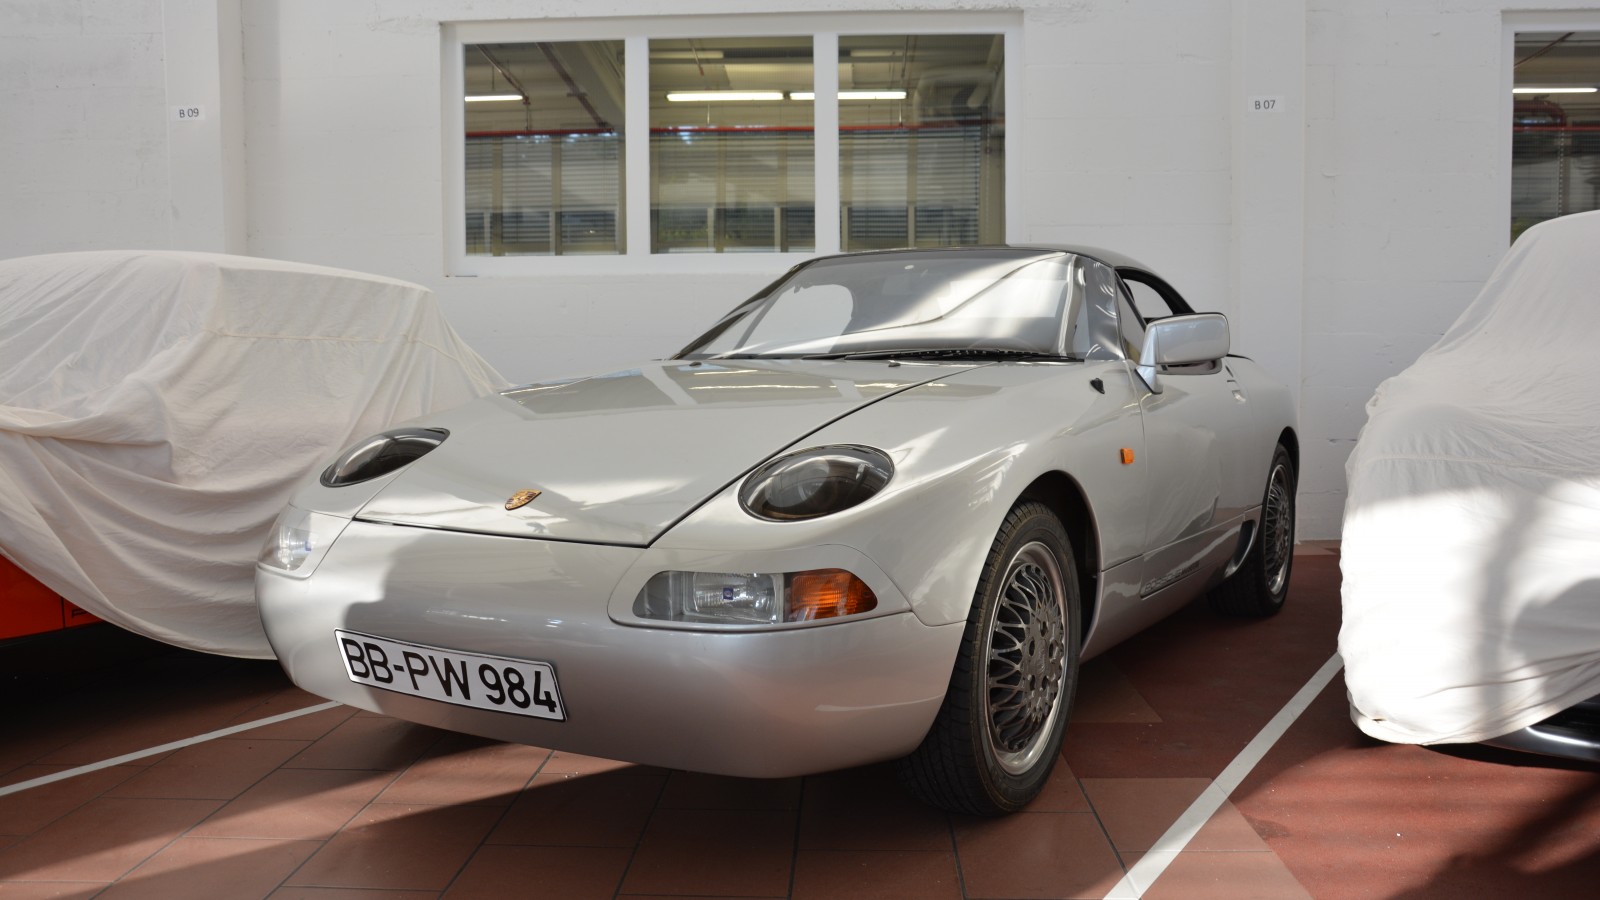 Rare car prototypes you’ve probably never seen